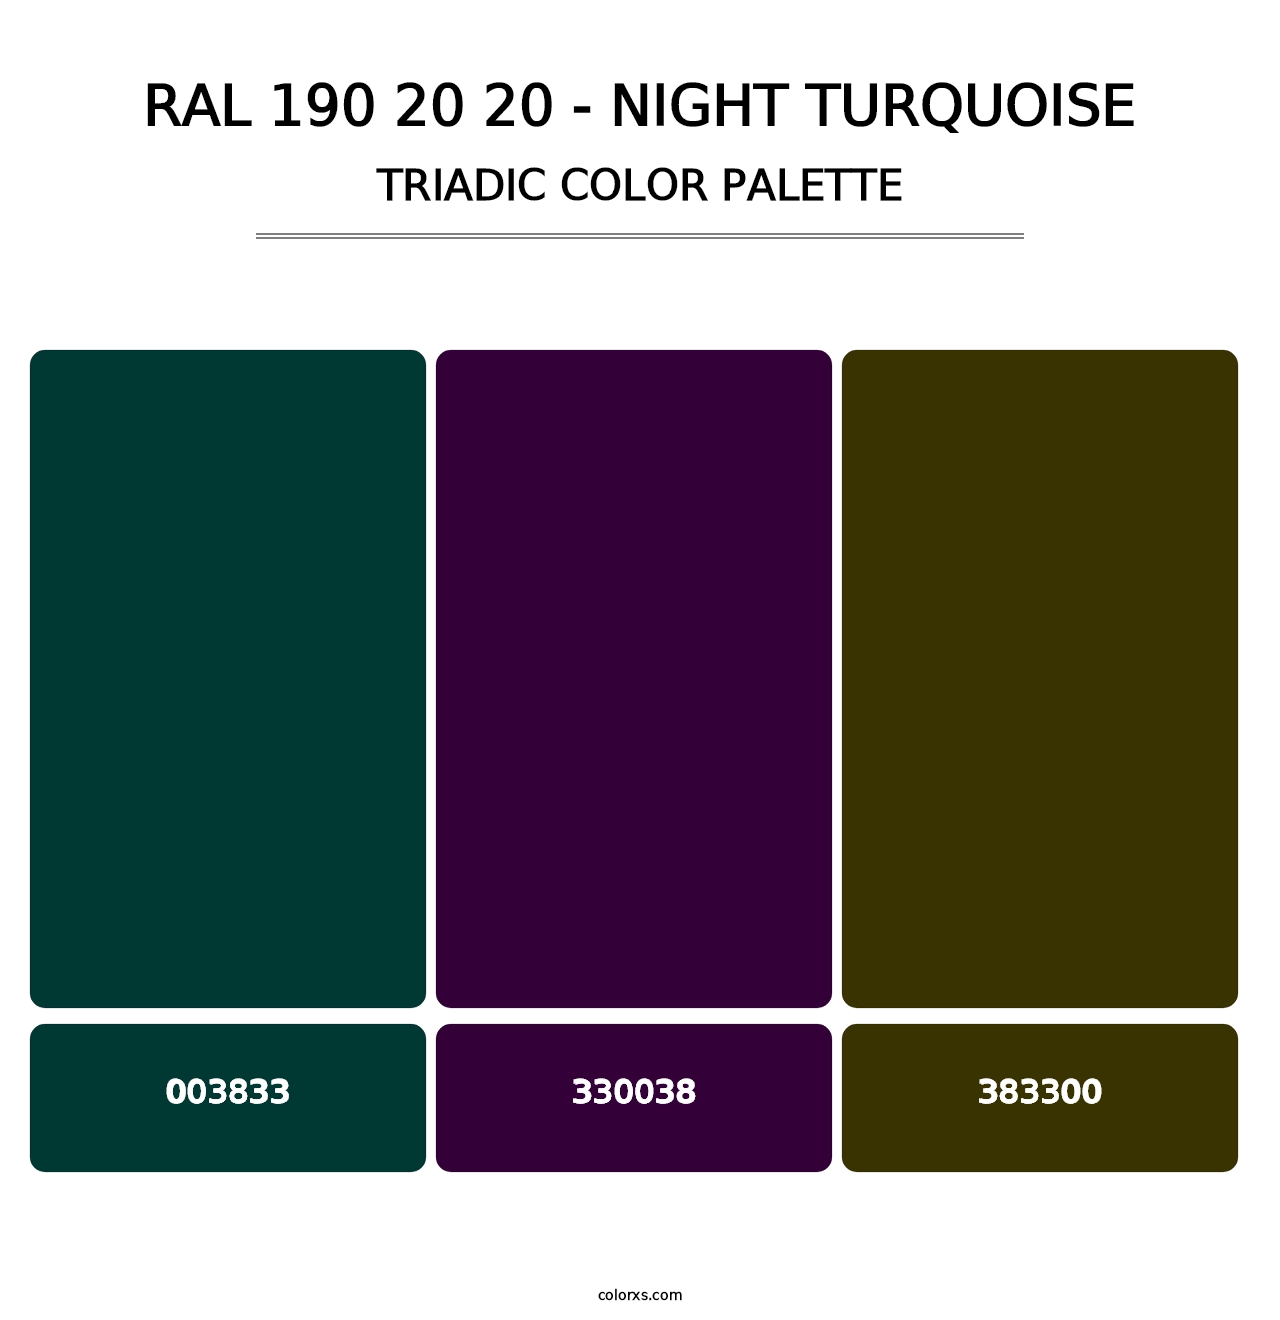 RAL 190 20 20 - Night Turquoise - Triadic Color Palette